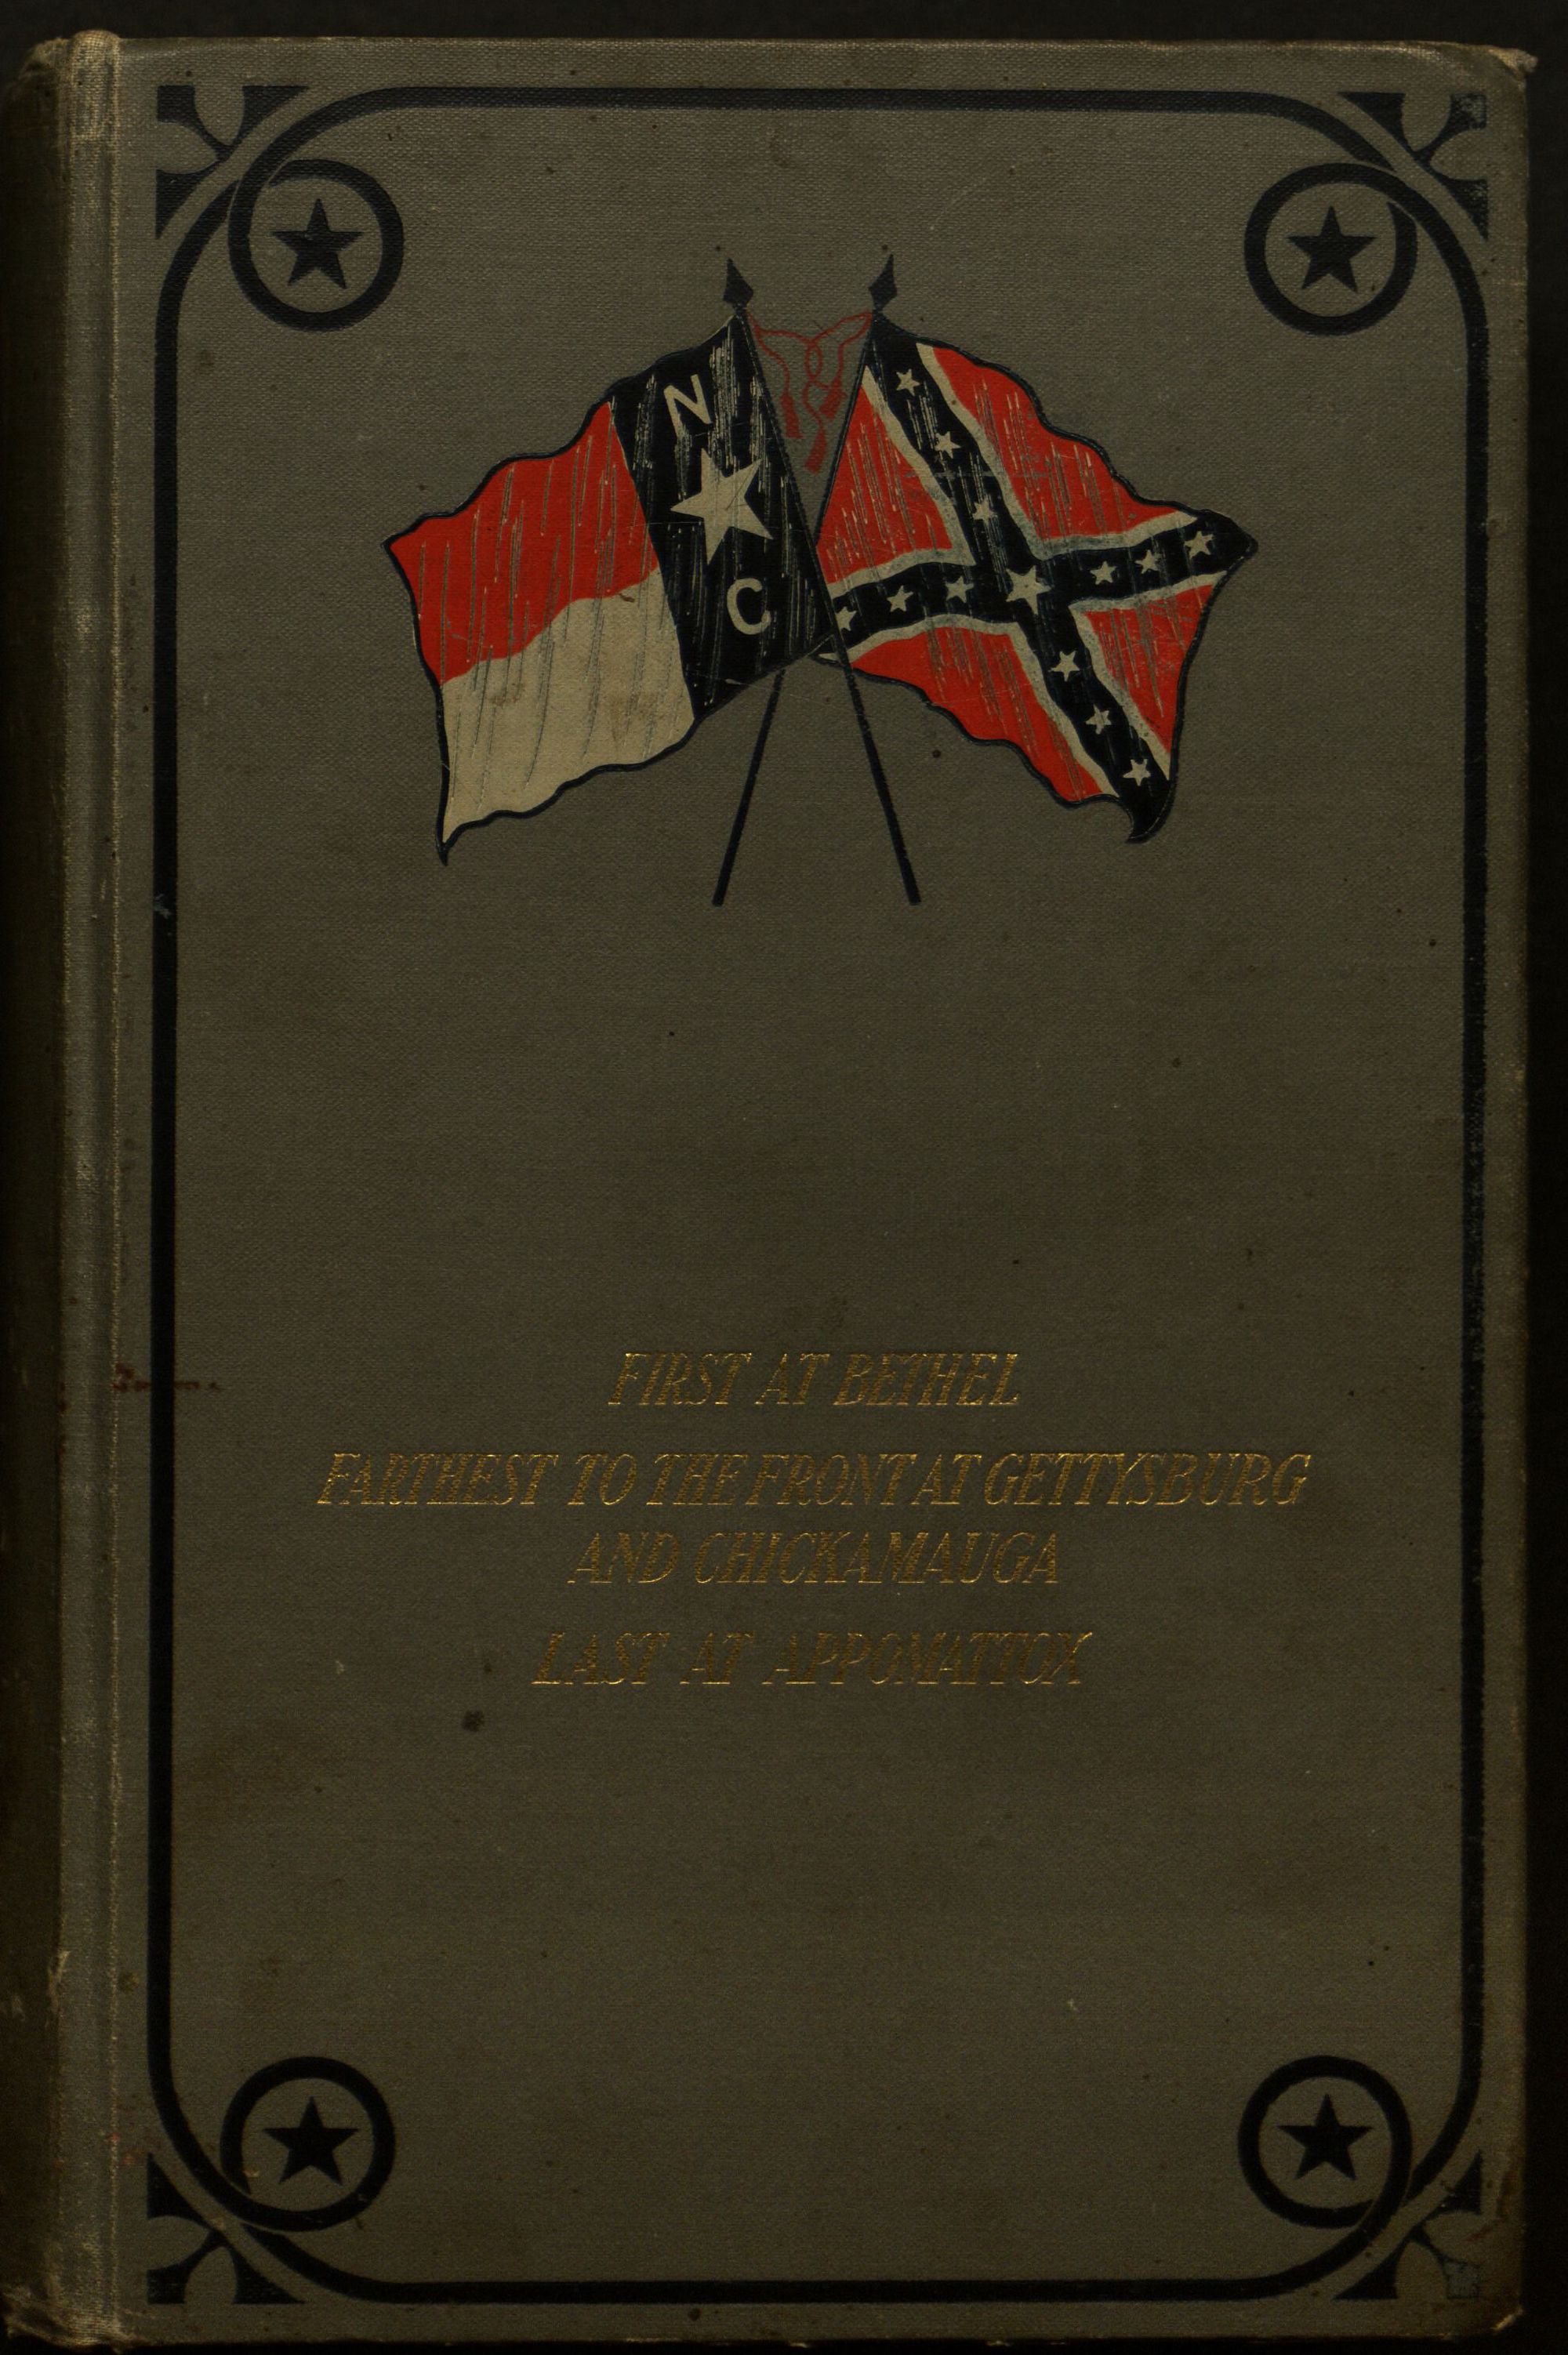 Histories of the several regiments and battalions from North Carolina, in the great war 1861-65